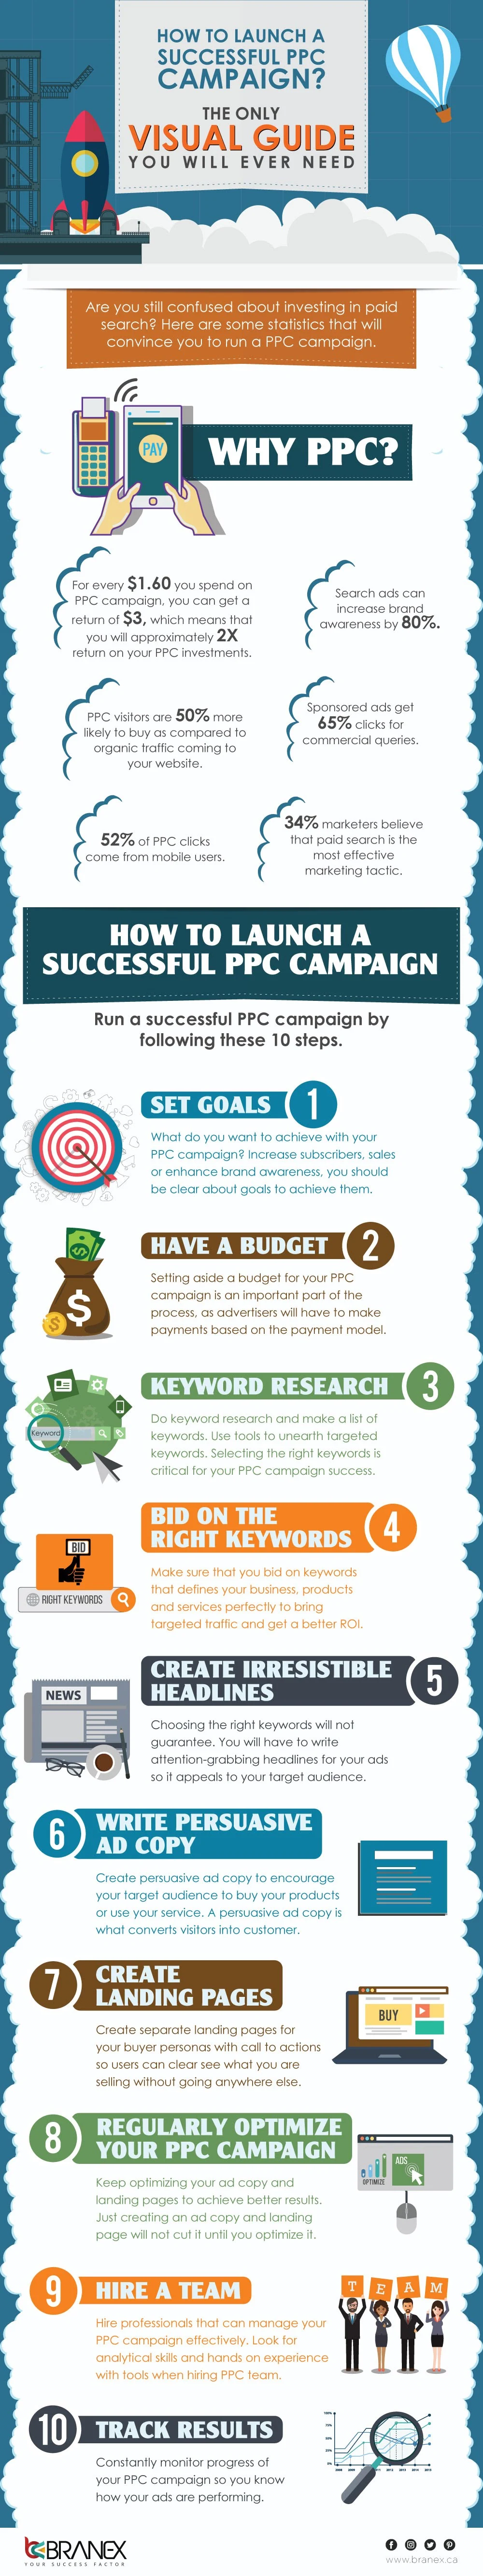 How To Launch A Successful PPC Campaign? - Infographic